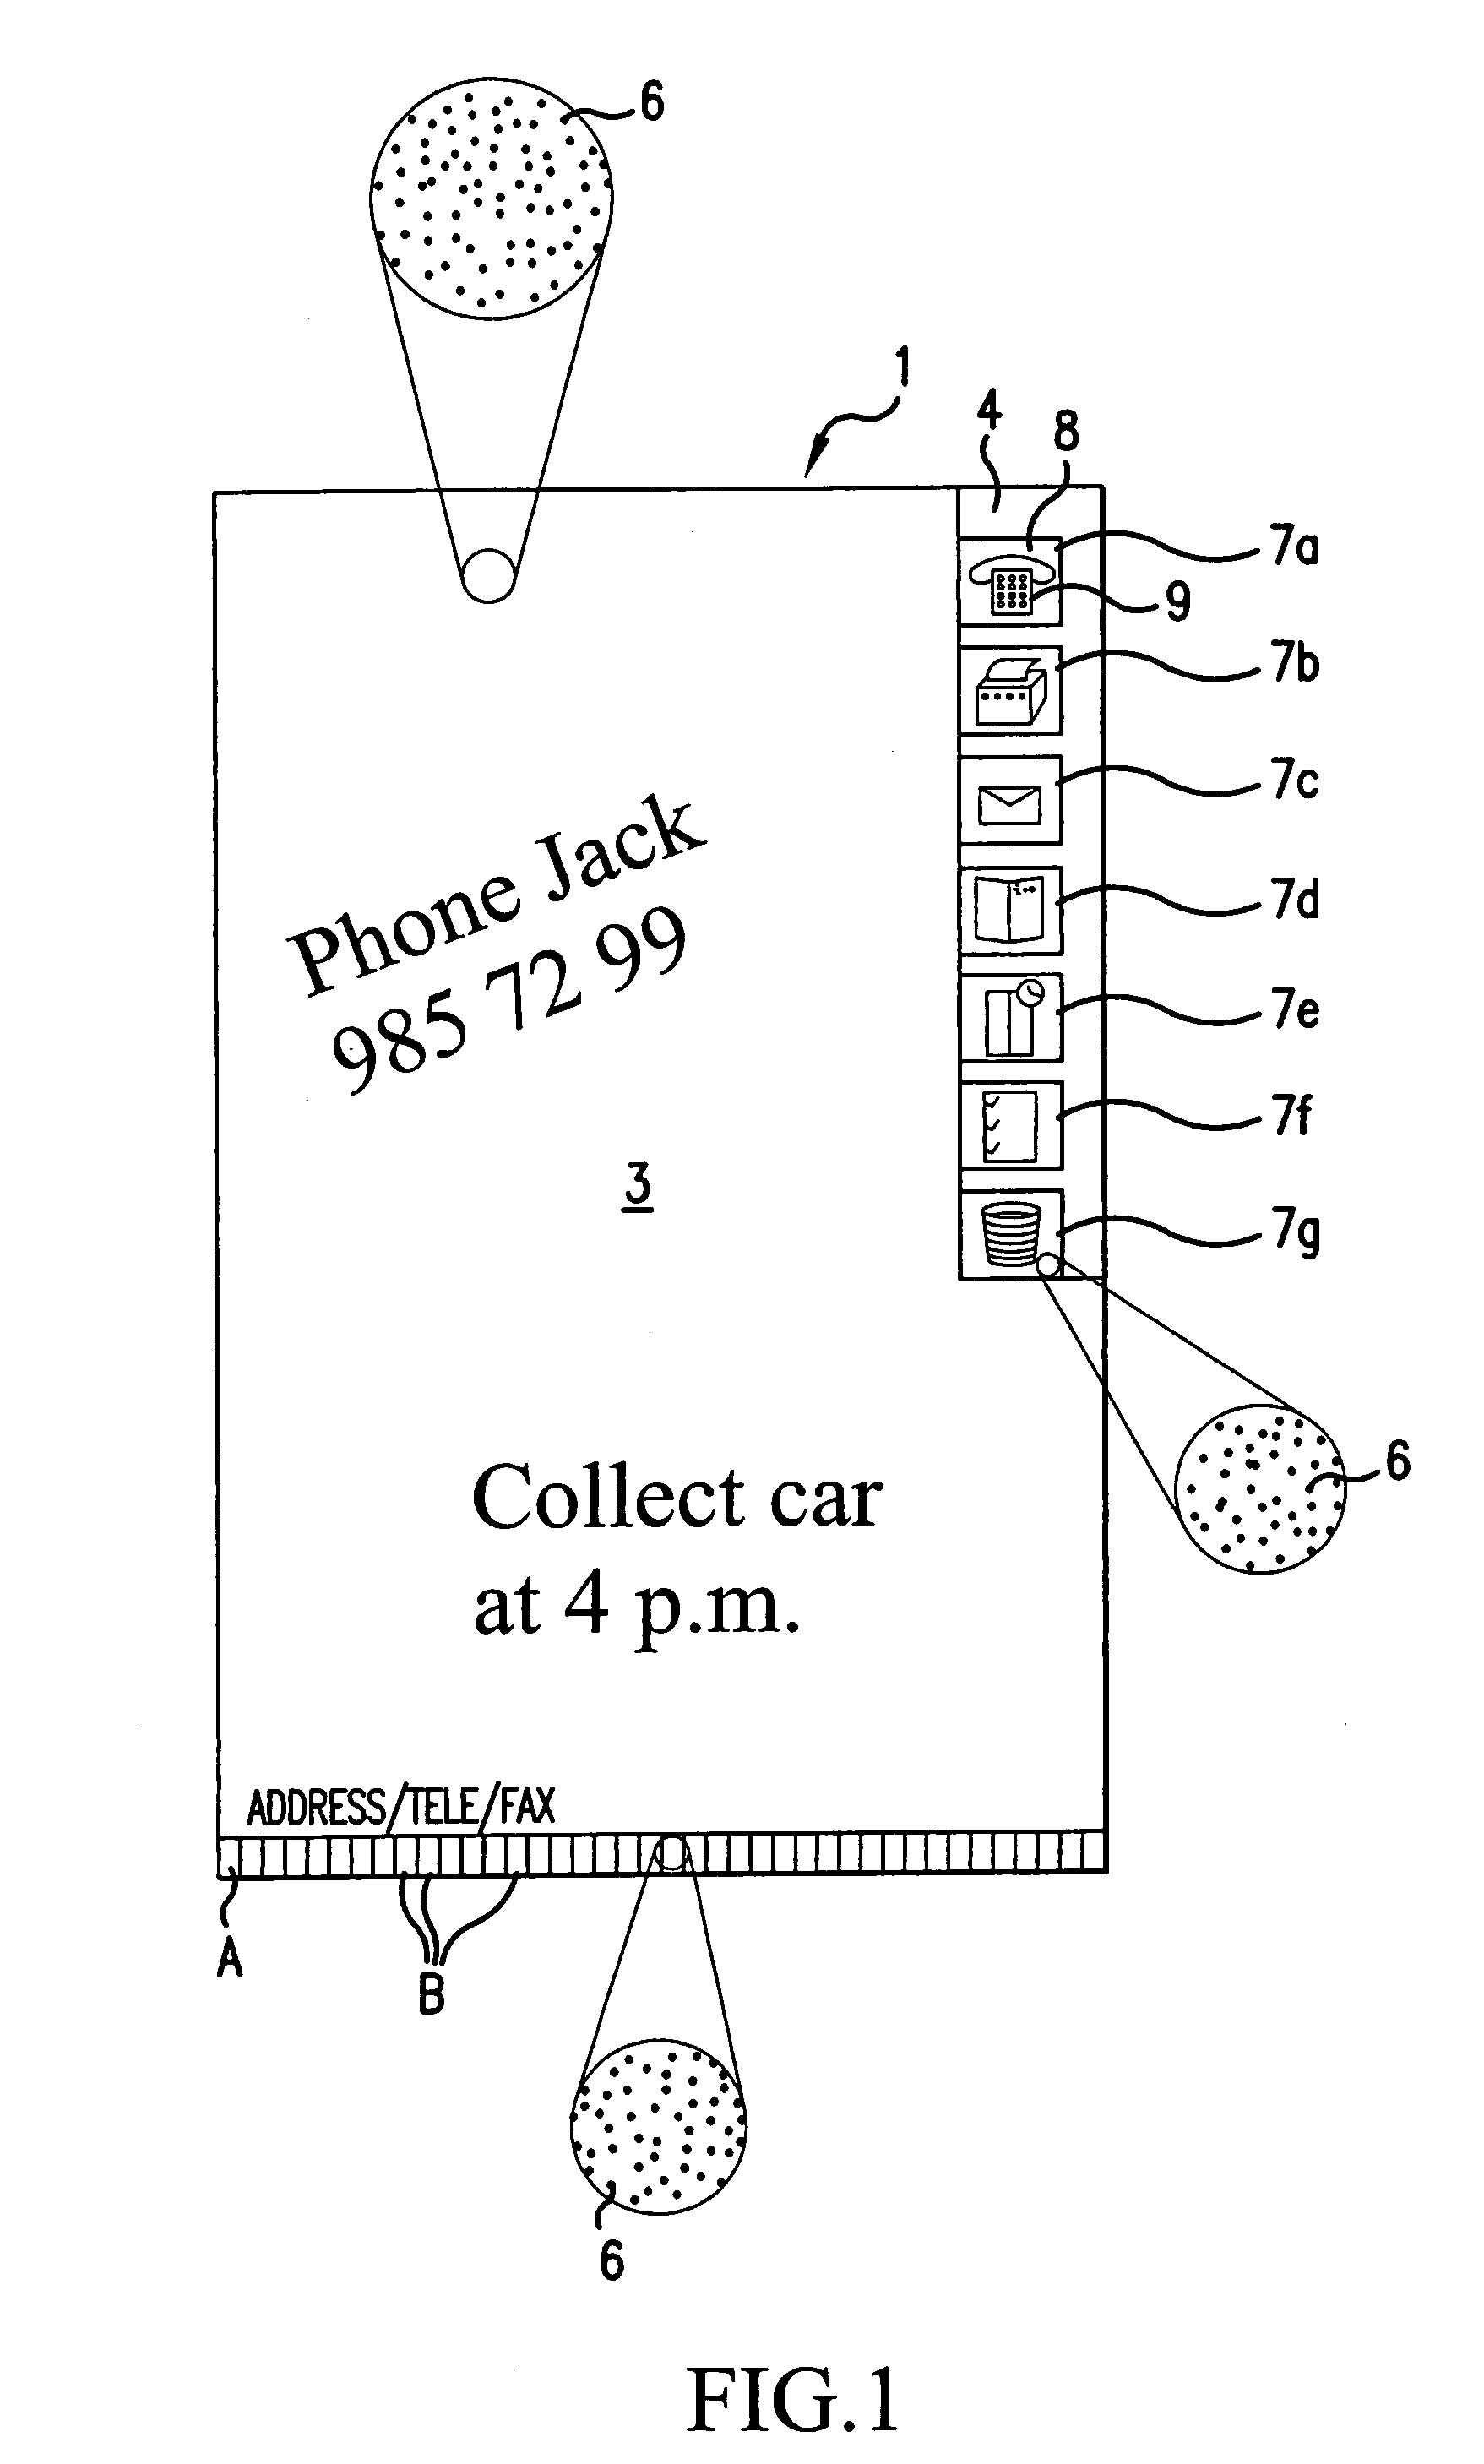 Position code bearing notepad employing activation icons